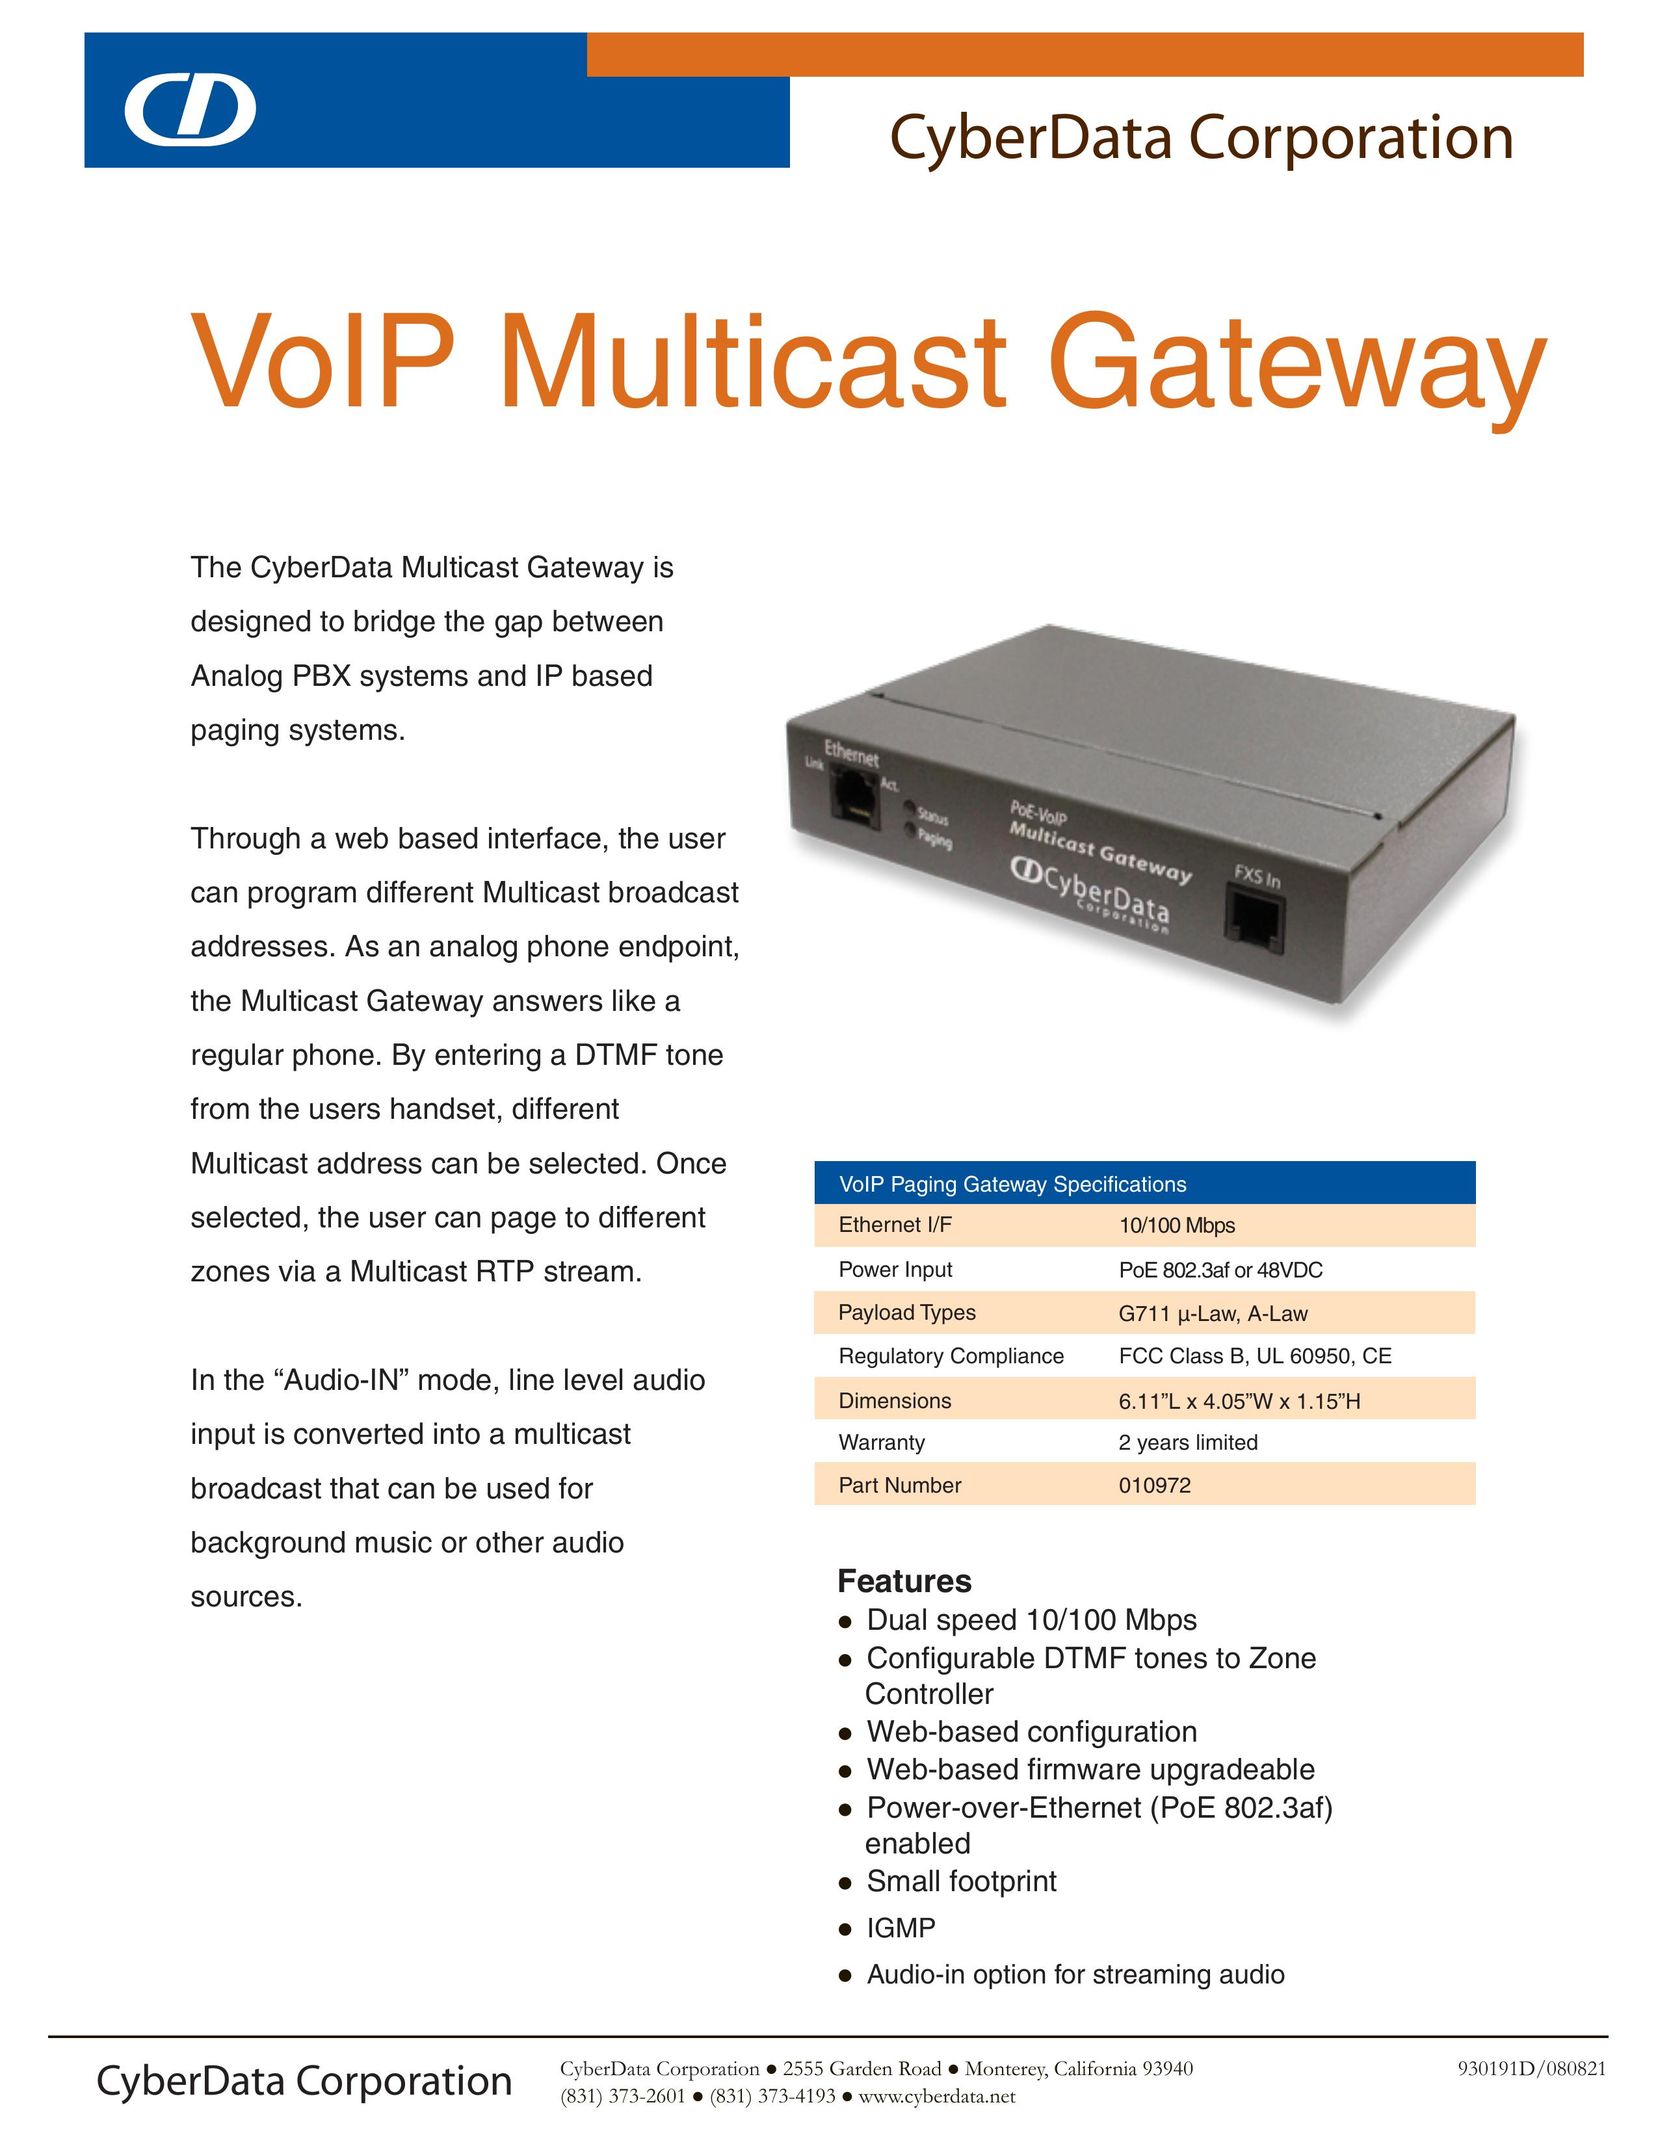 CyberData VoIP Multicast Gateway Network Router User Manual